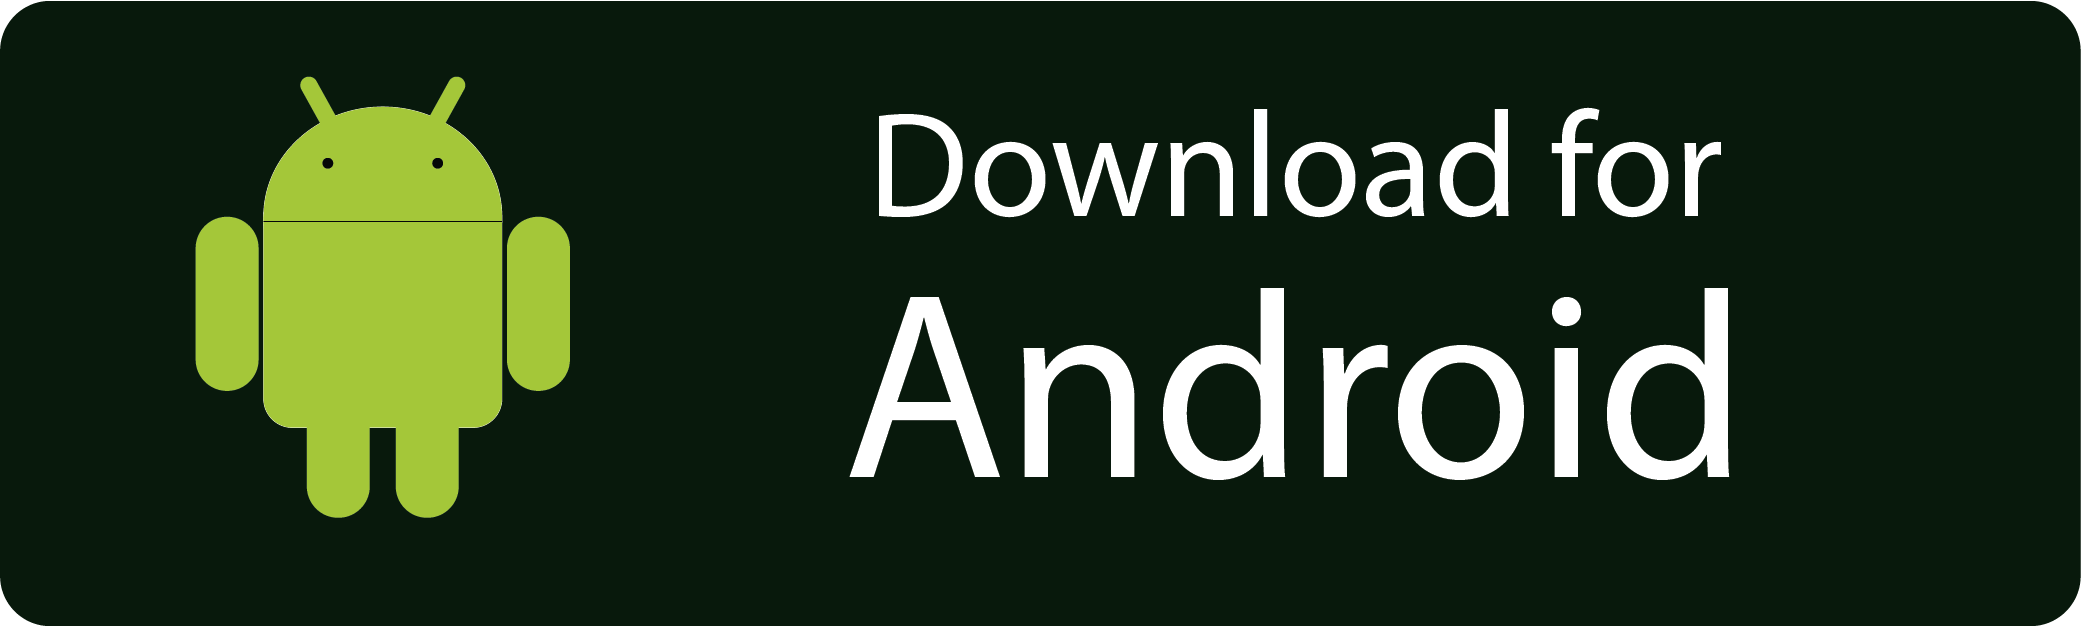 Download on App Store Android Bandges_Android Button